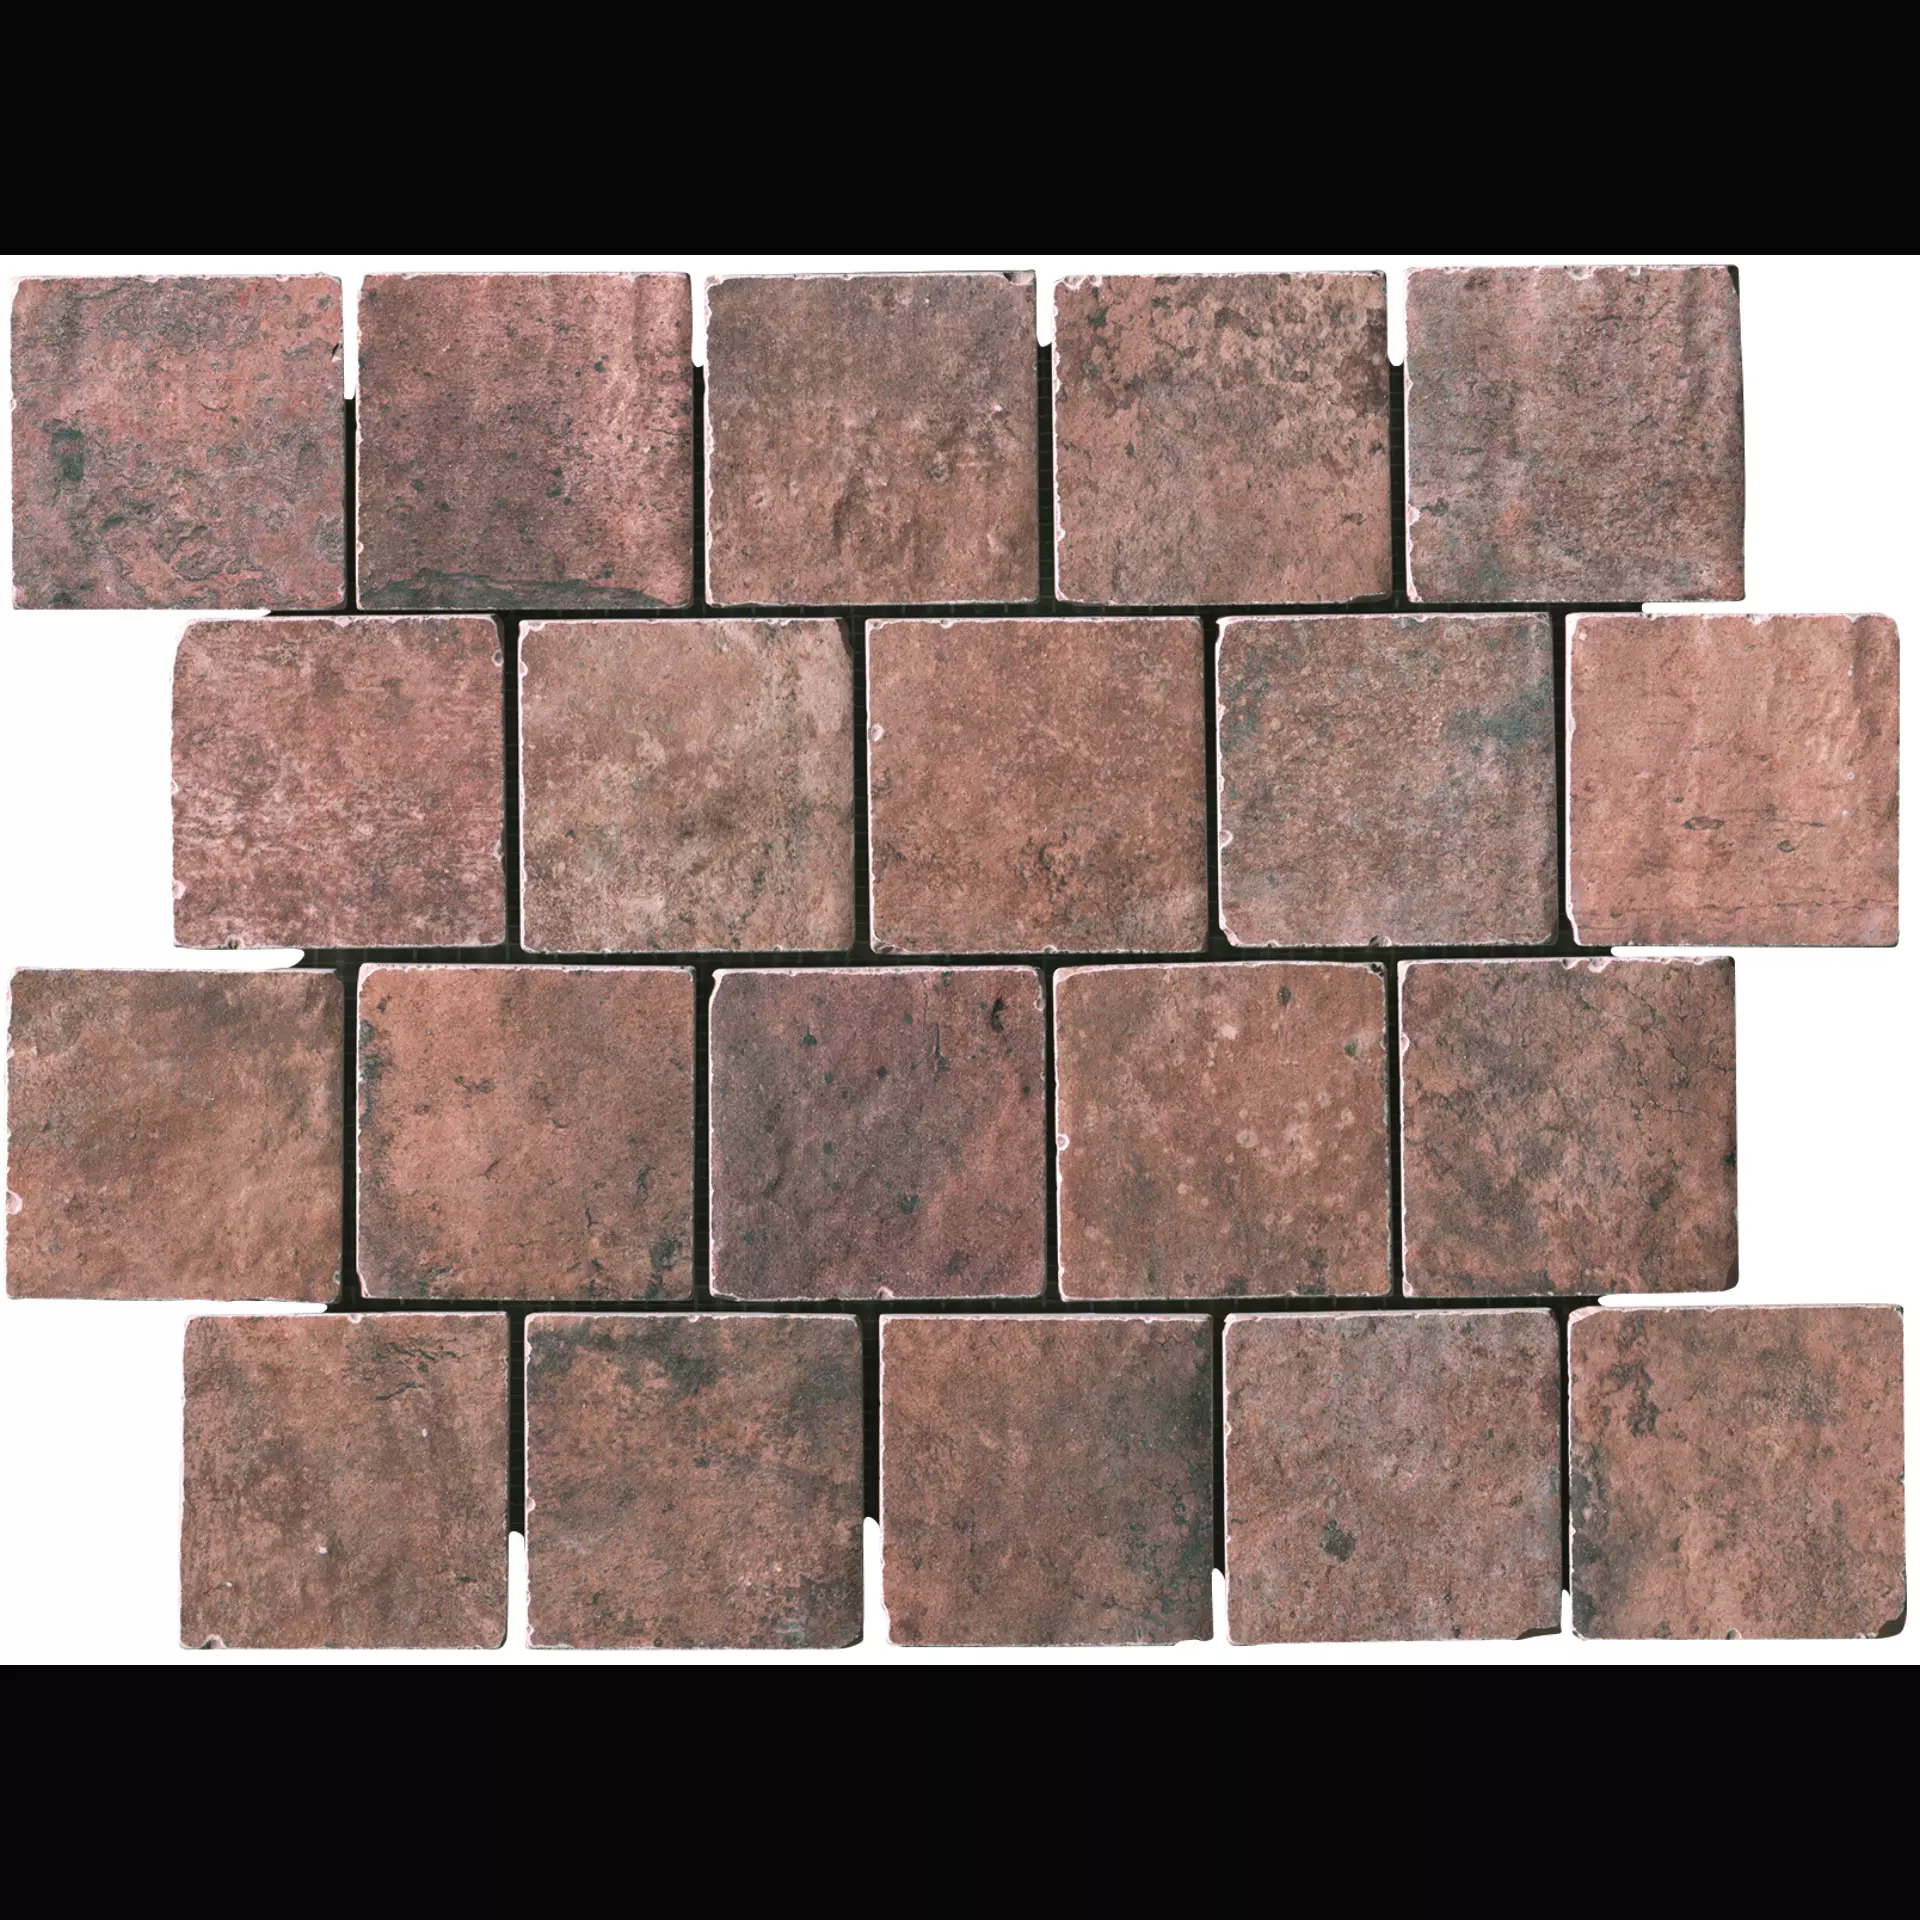 CIR Chicago Old Chicago Naturale Mosaic Spacco 1048268 30x40cm 10mm